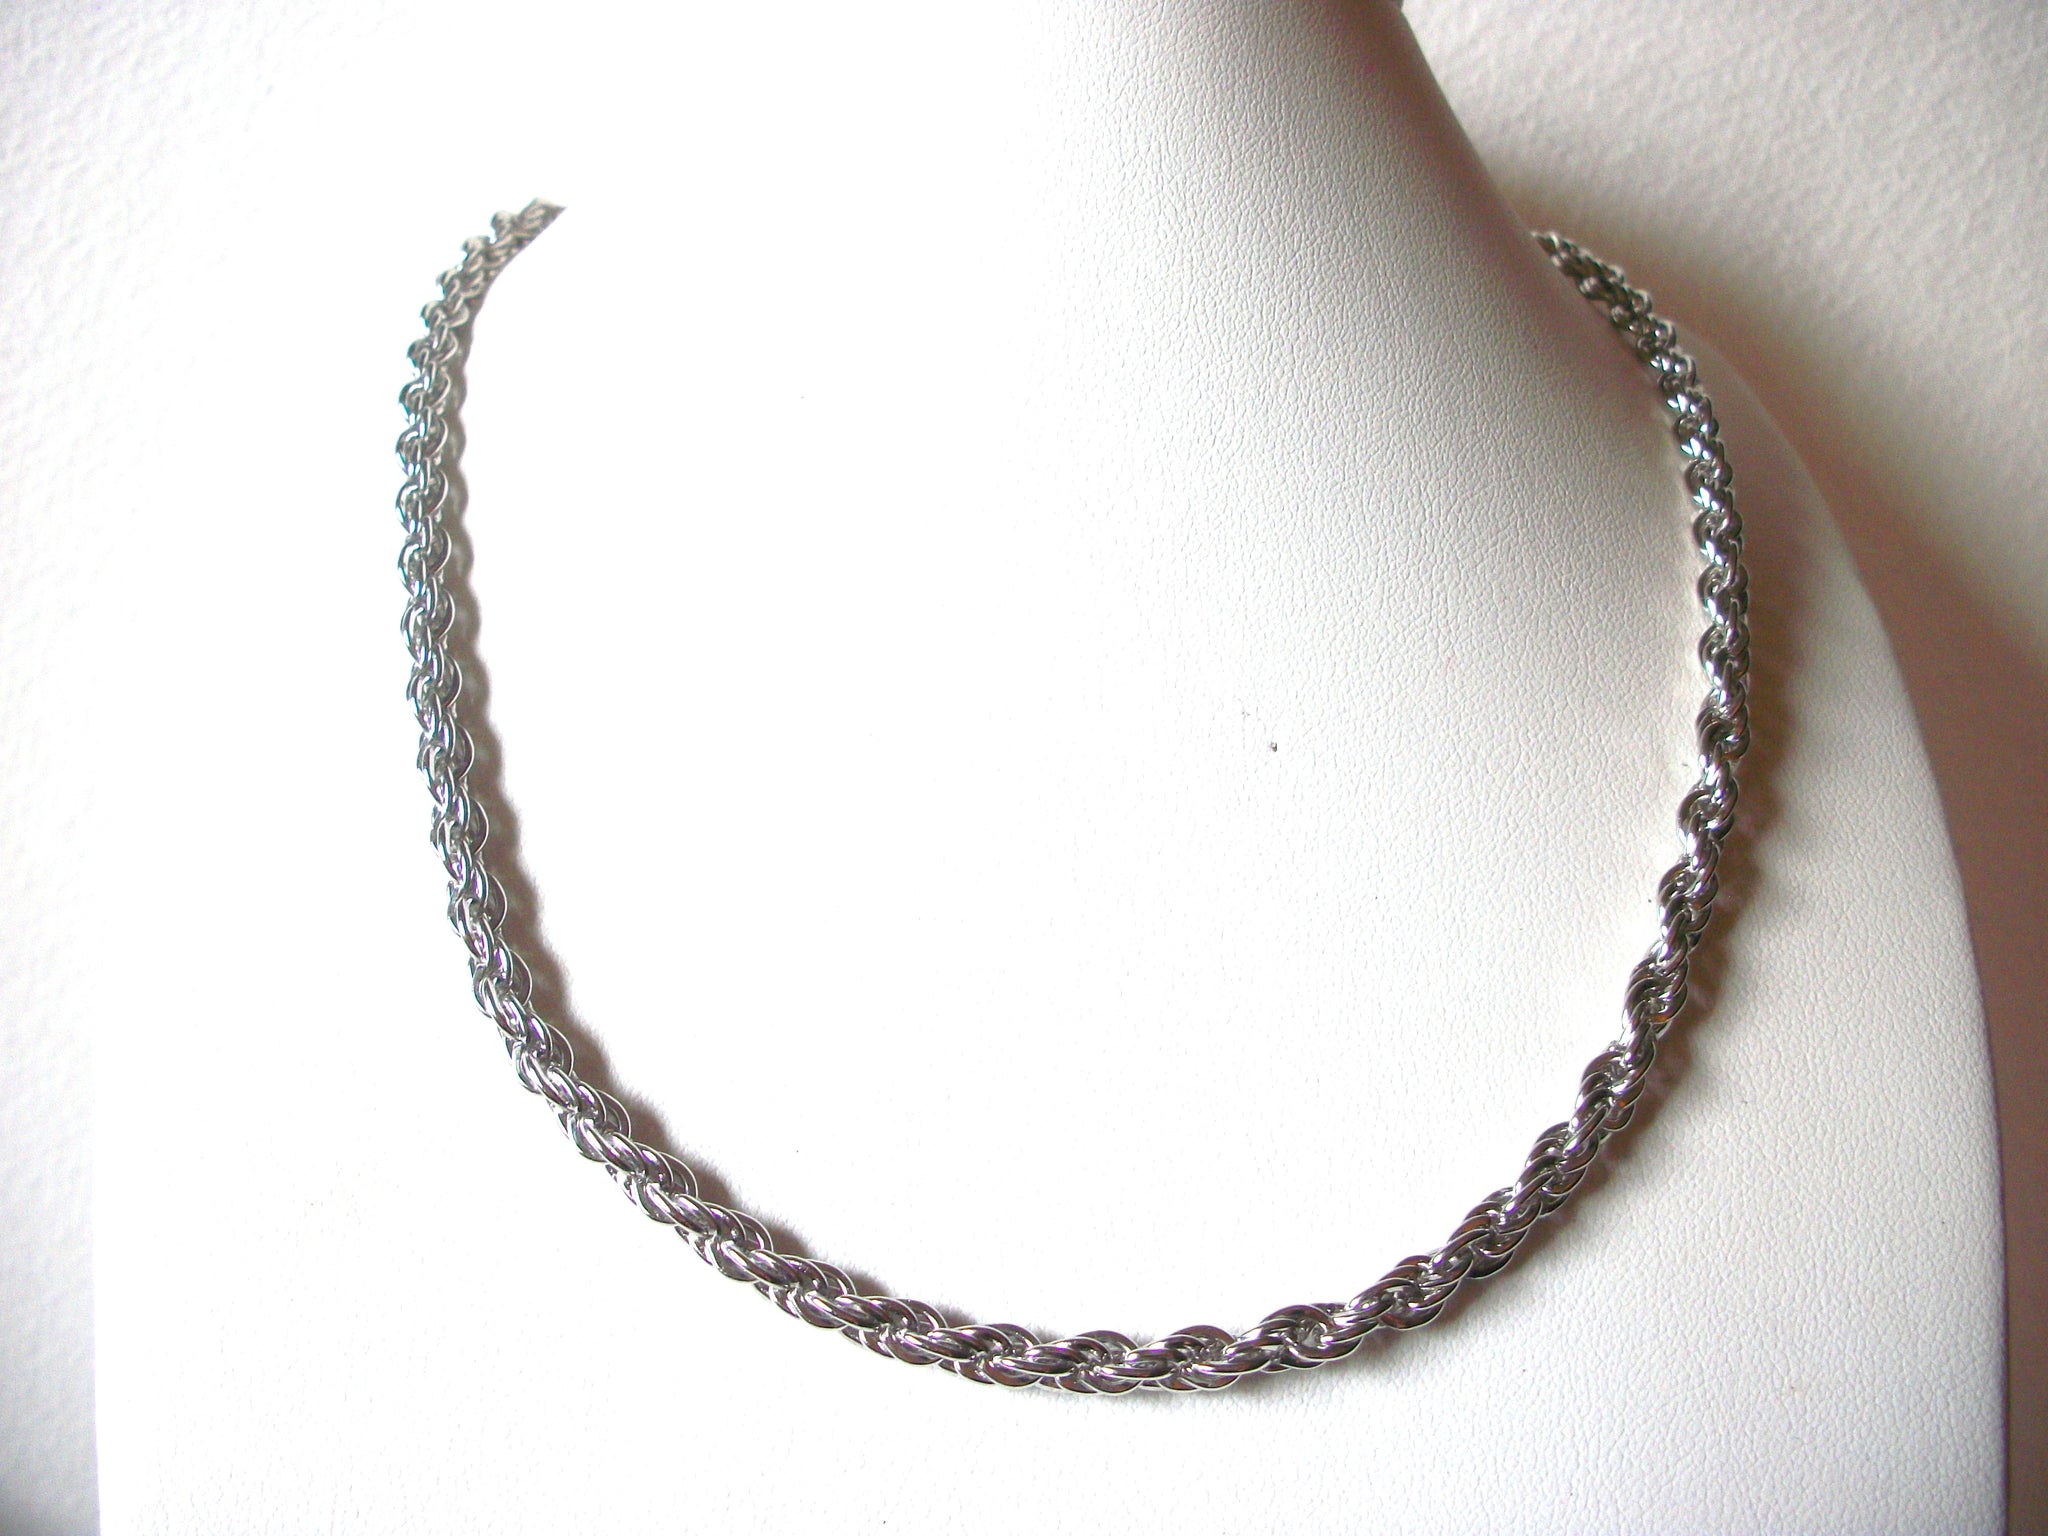 Vintage Silver Toned Rope Chain Links 18" Necklace 82017